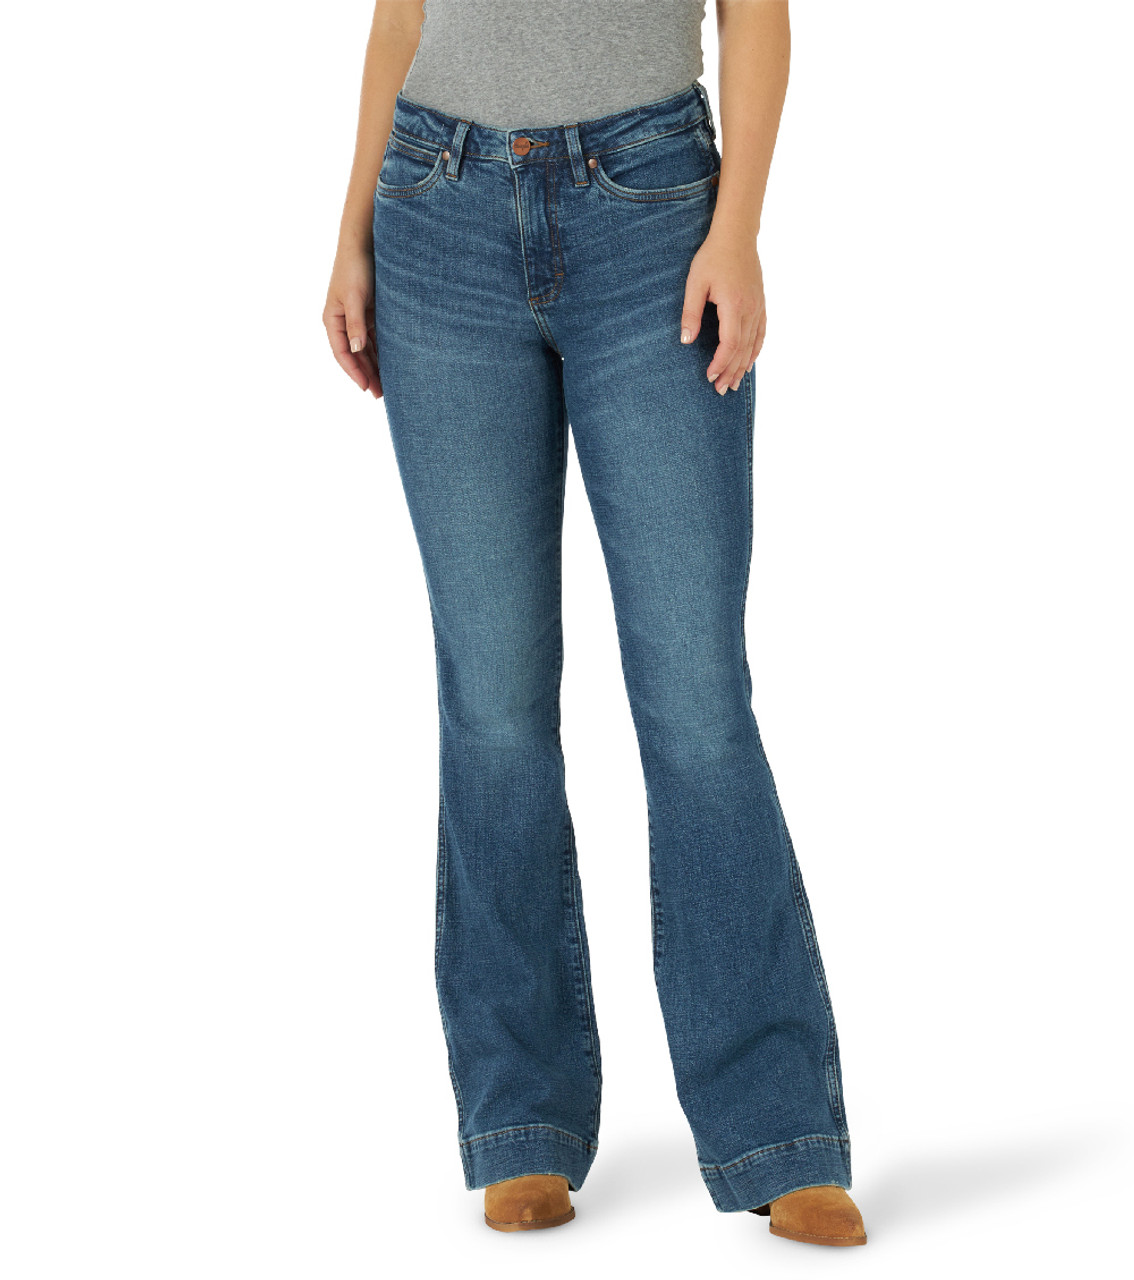 Wrangler® Cowboy Cut Straight Stretch Jean - Women's Jeans in Antique Wash